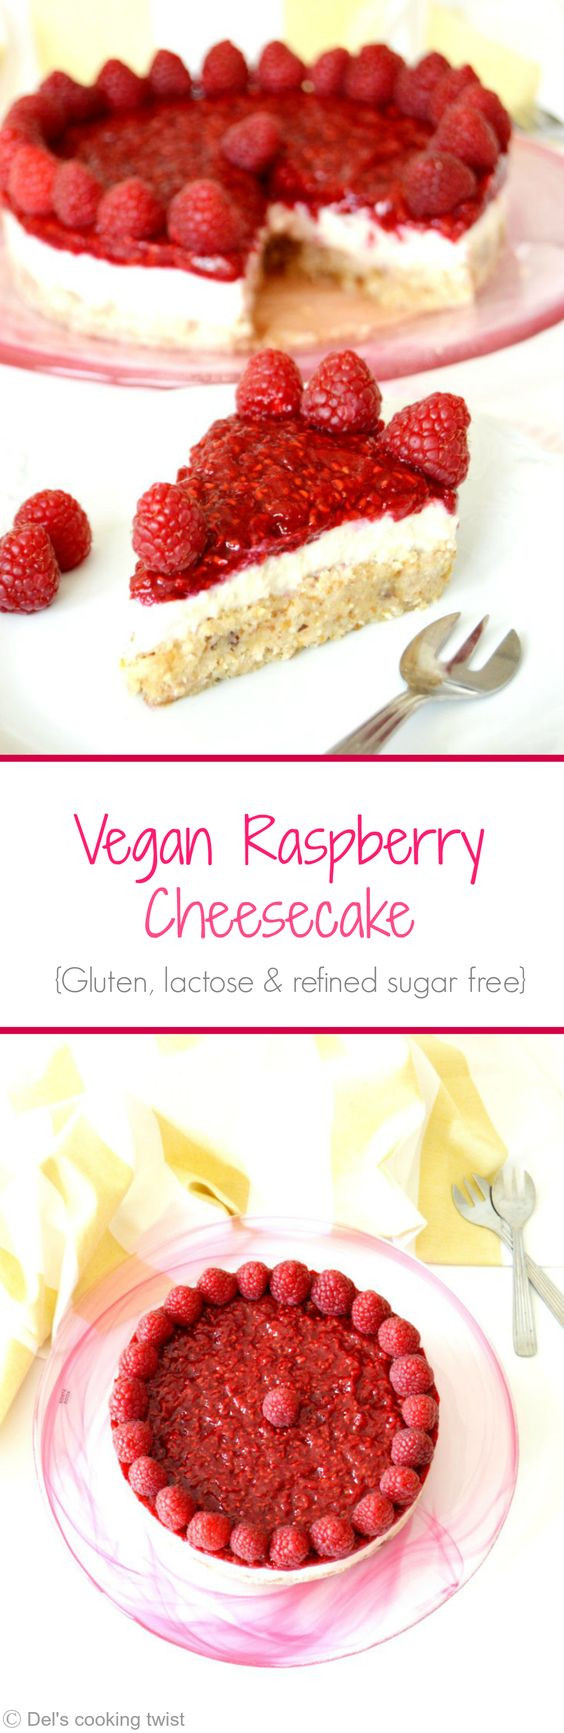 Naturally Gluten Free Desserts
 Naturally gluten lactose and refined sugar free this